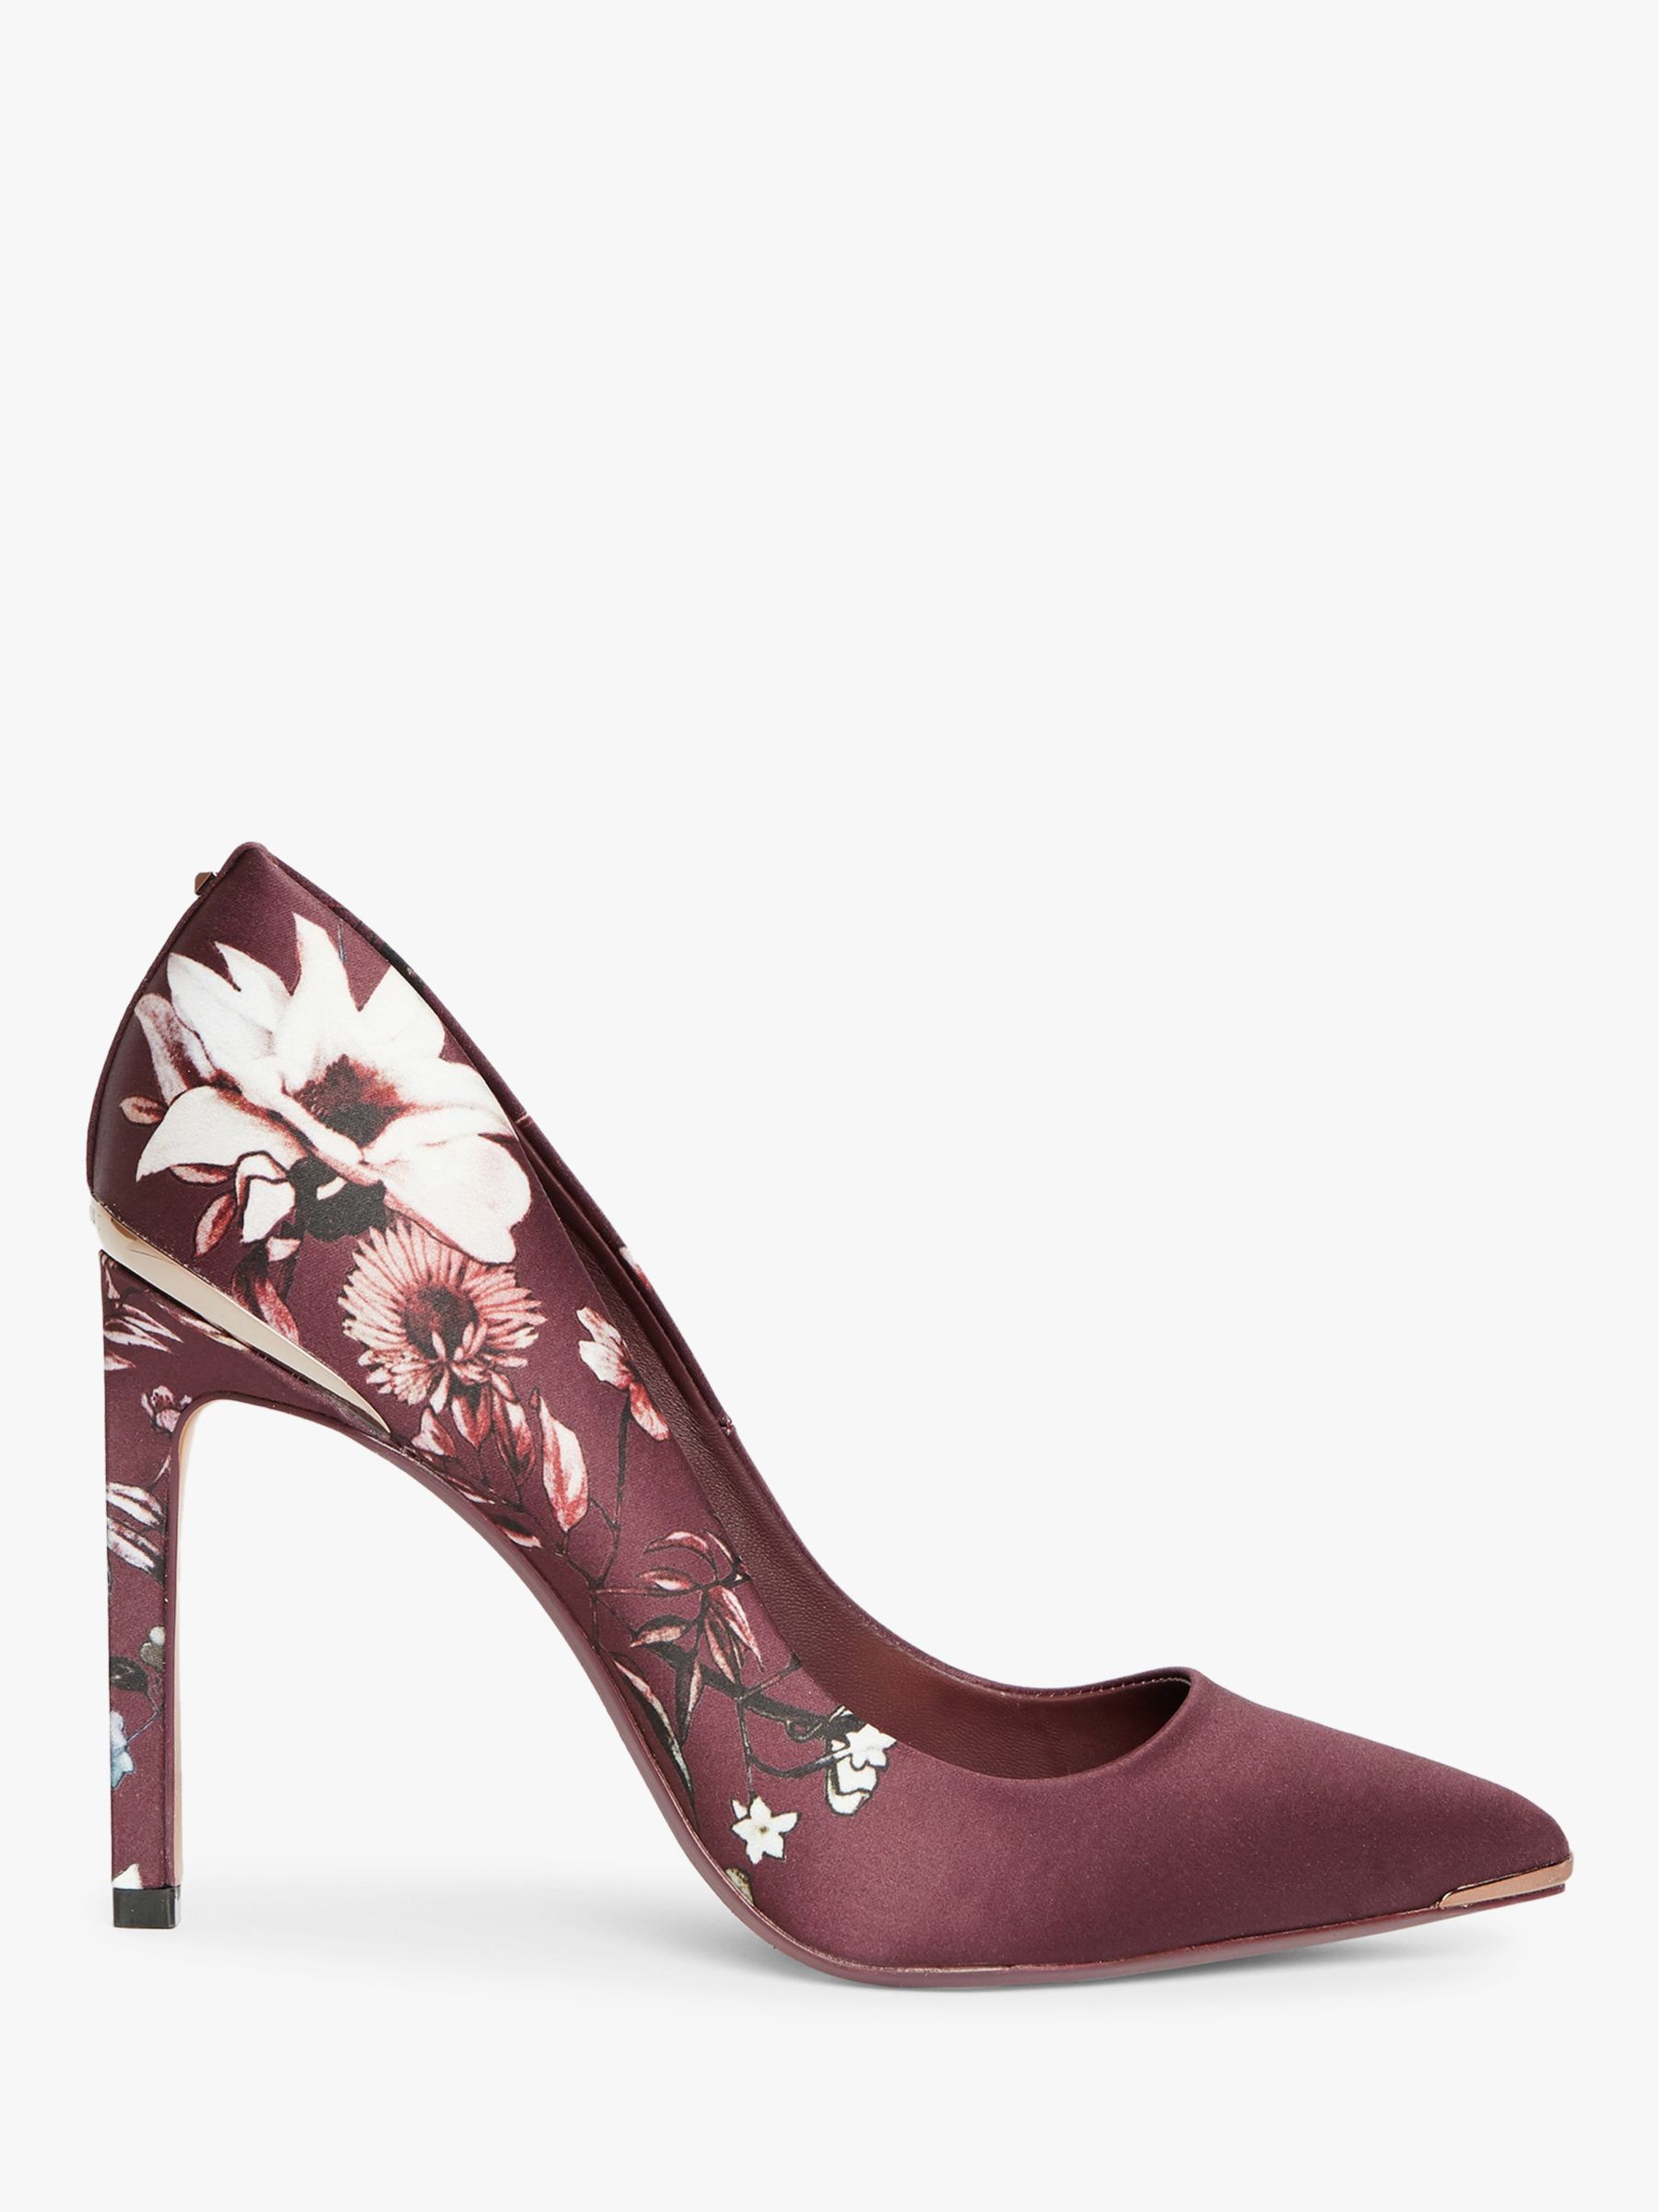 Ted Baker Malenii Floral Stiletto Heel Court Shoes, Red Bordeaux